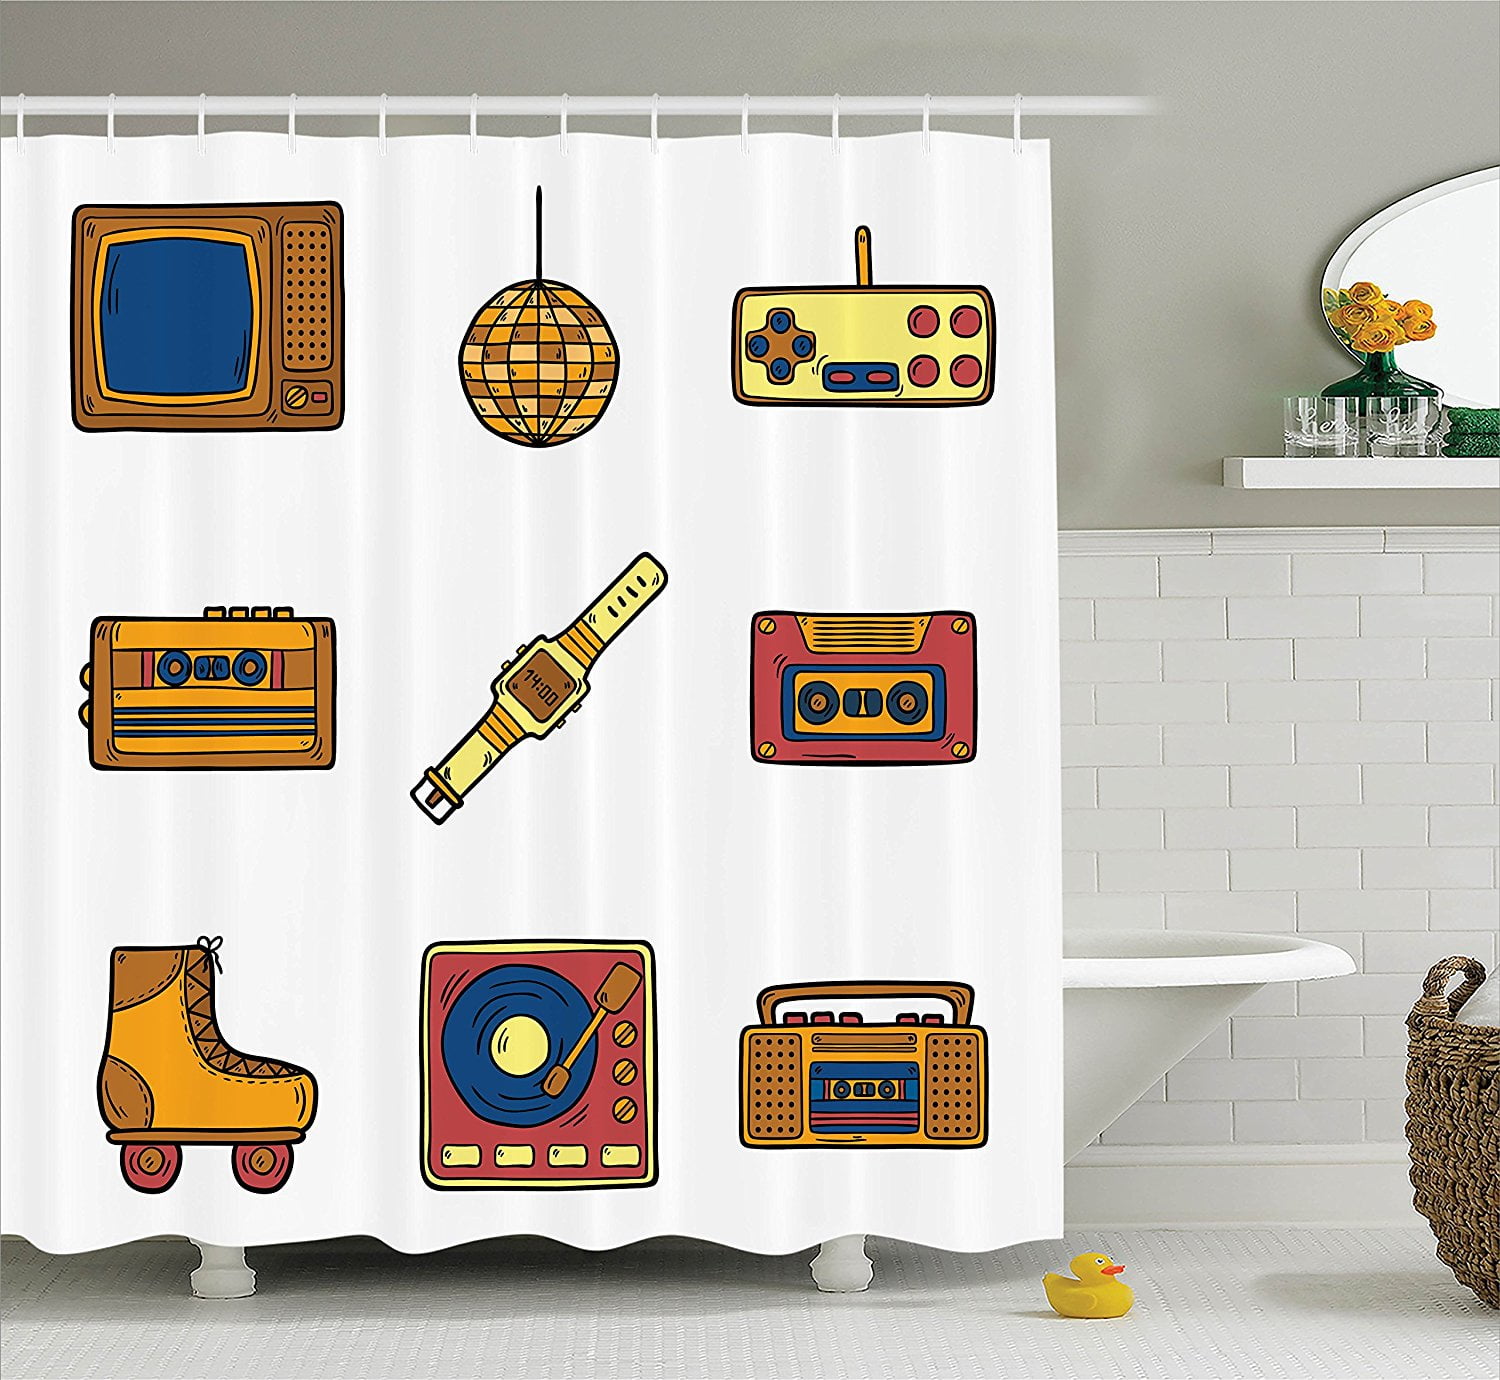 Details about   Vintage Style Exotic Geometric Pattern Fabric Shower Curtain Set Bathroom Decor 